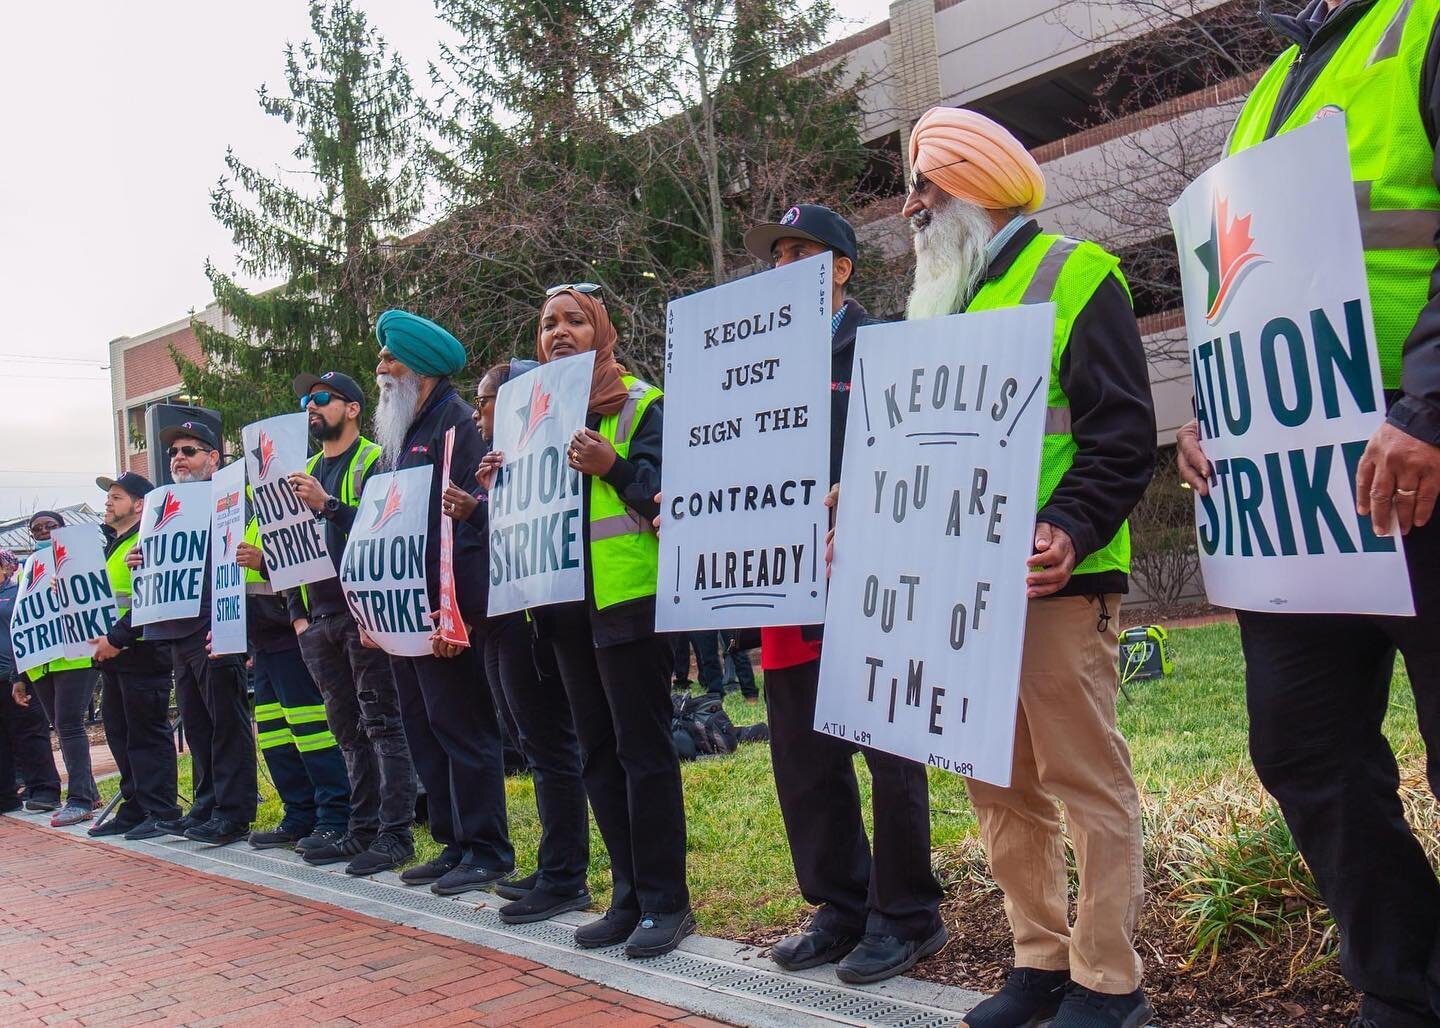 When we fight, we win &mdash; and we&rsquo;re not afraid to fight hard. 

Local 689 and our allies took to Leesburg this Valentine&rsquo;s Day to make our voices heard loud and clear: it is time to fine Keolis for its heartless treatment of the ridin